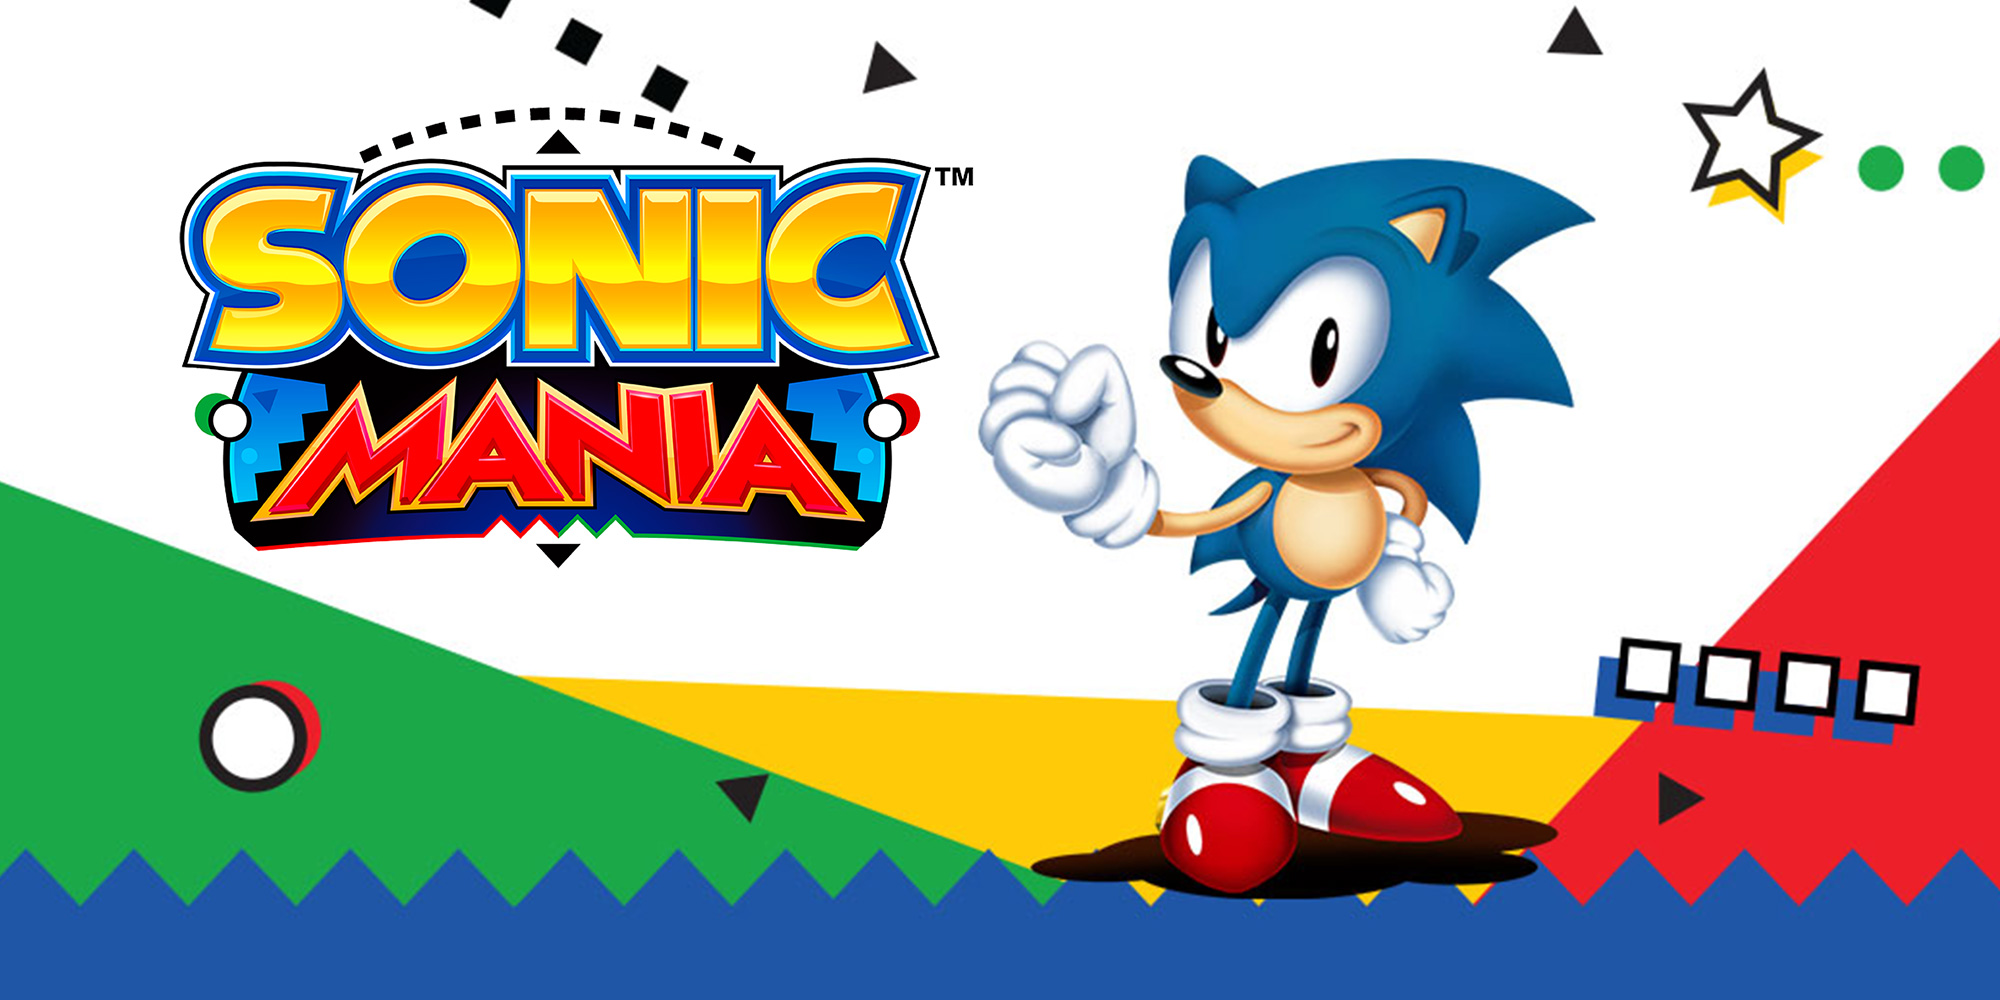 Sonic Sonic The Hedgehog Sonic Mania Adventures Sonic Mania Sega Mighty Tails Character Knuckles Com 2000x1000